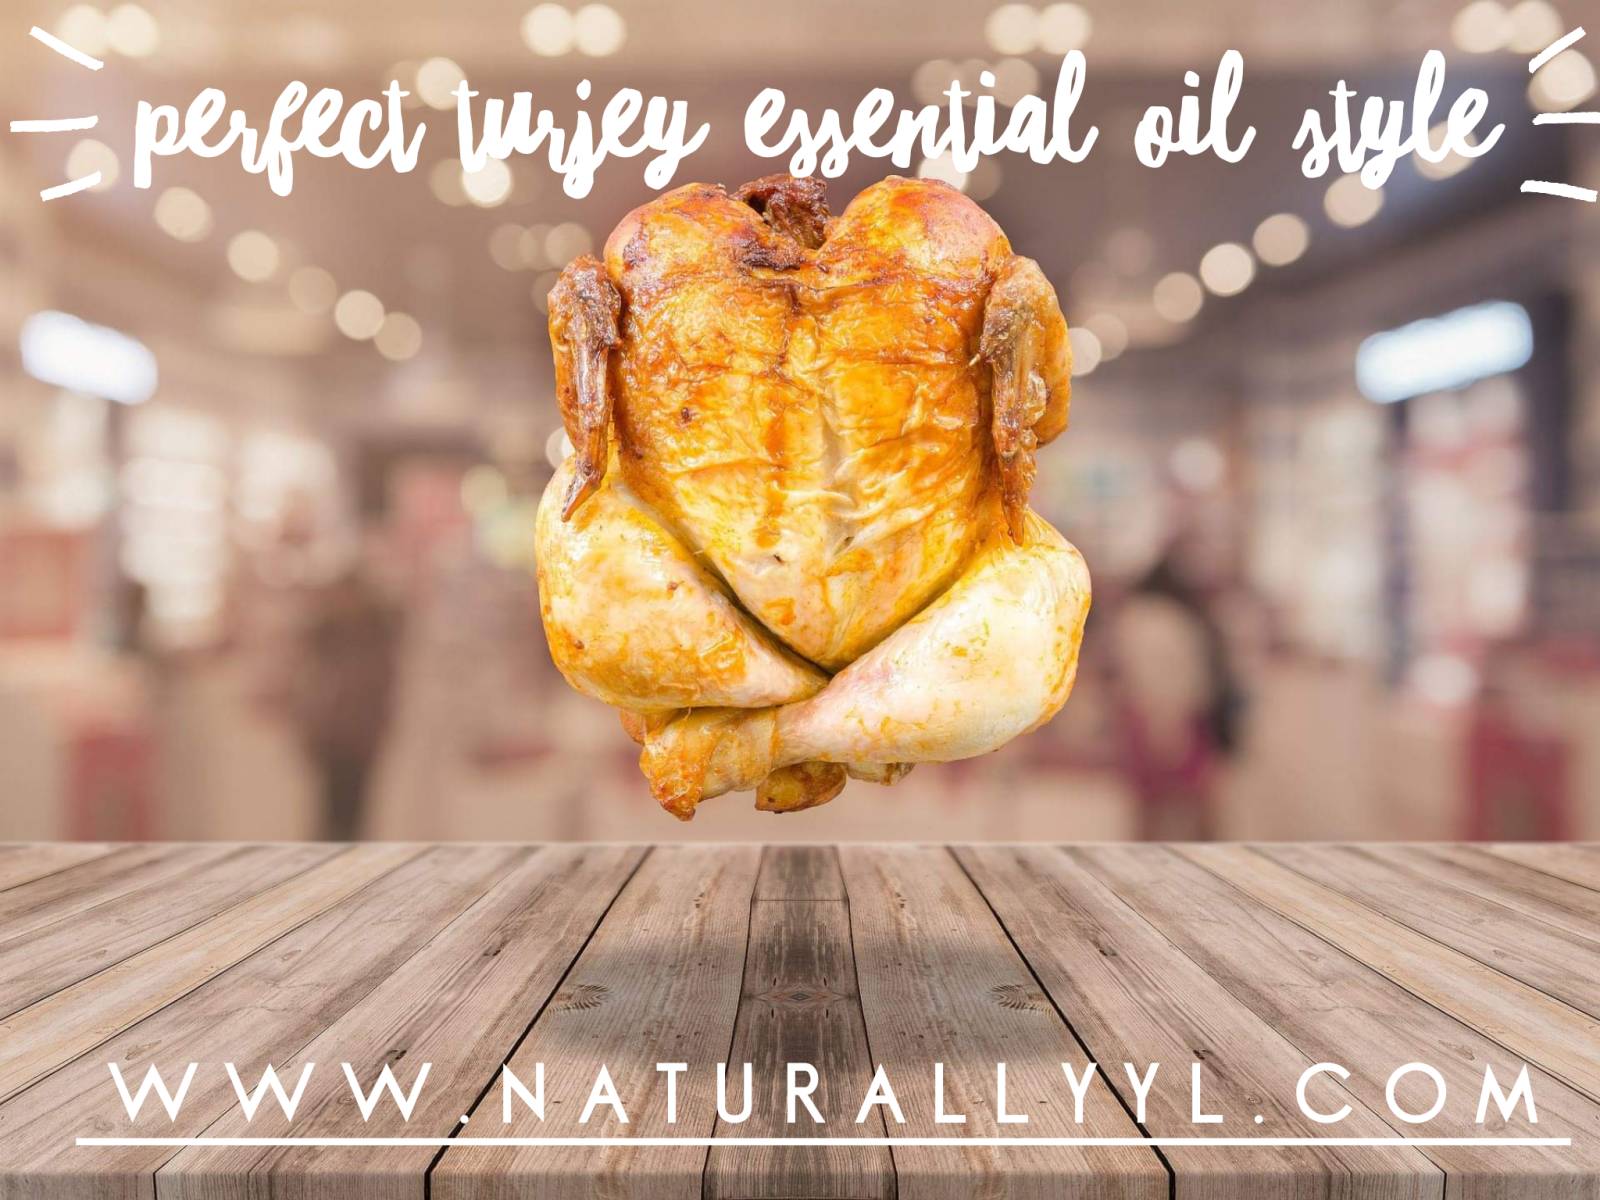 The Perfect Turkey Essential Oil Style!